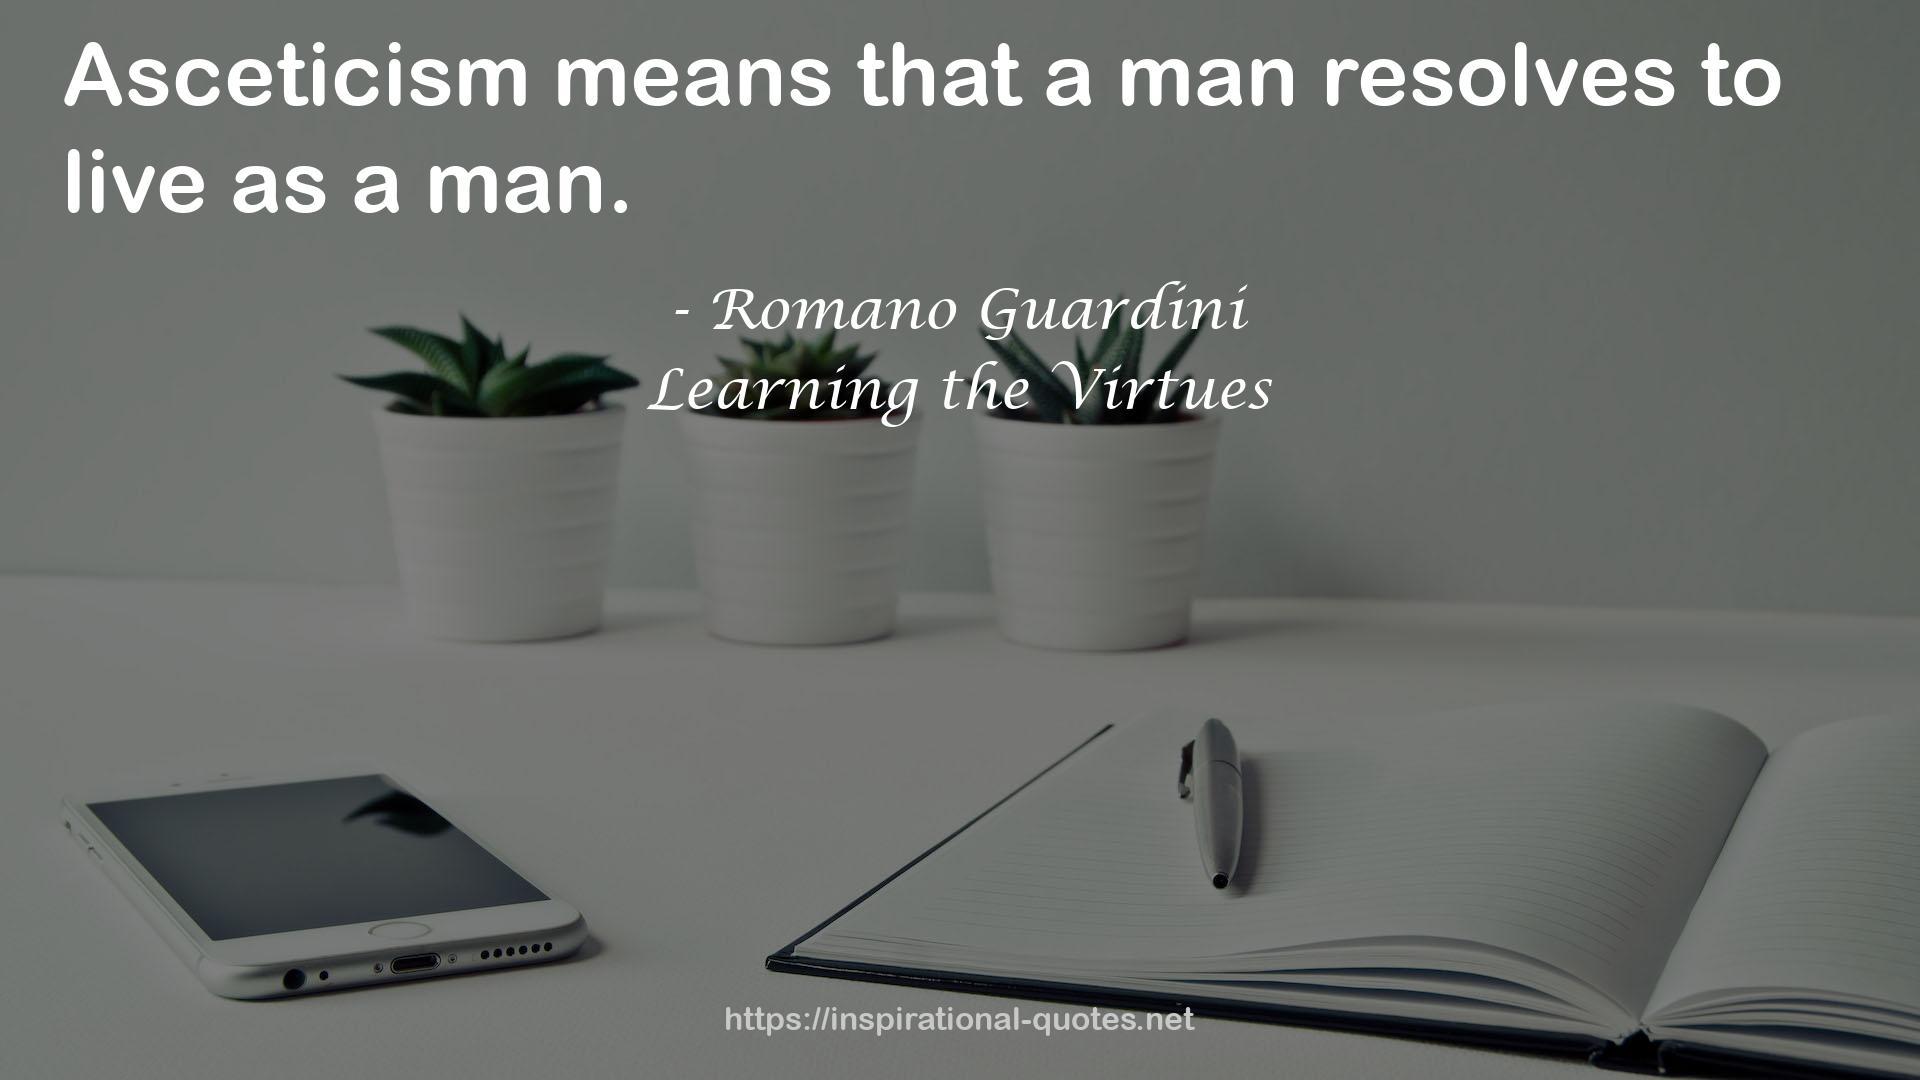 Learning the Virtues QUOTES